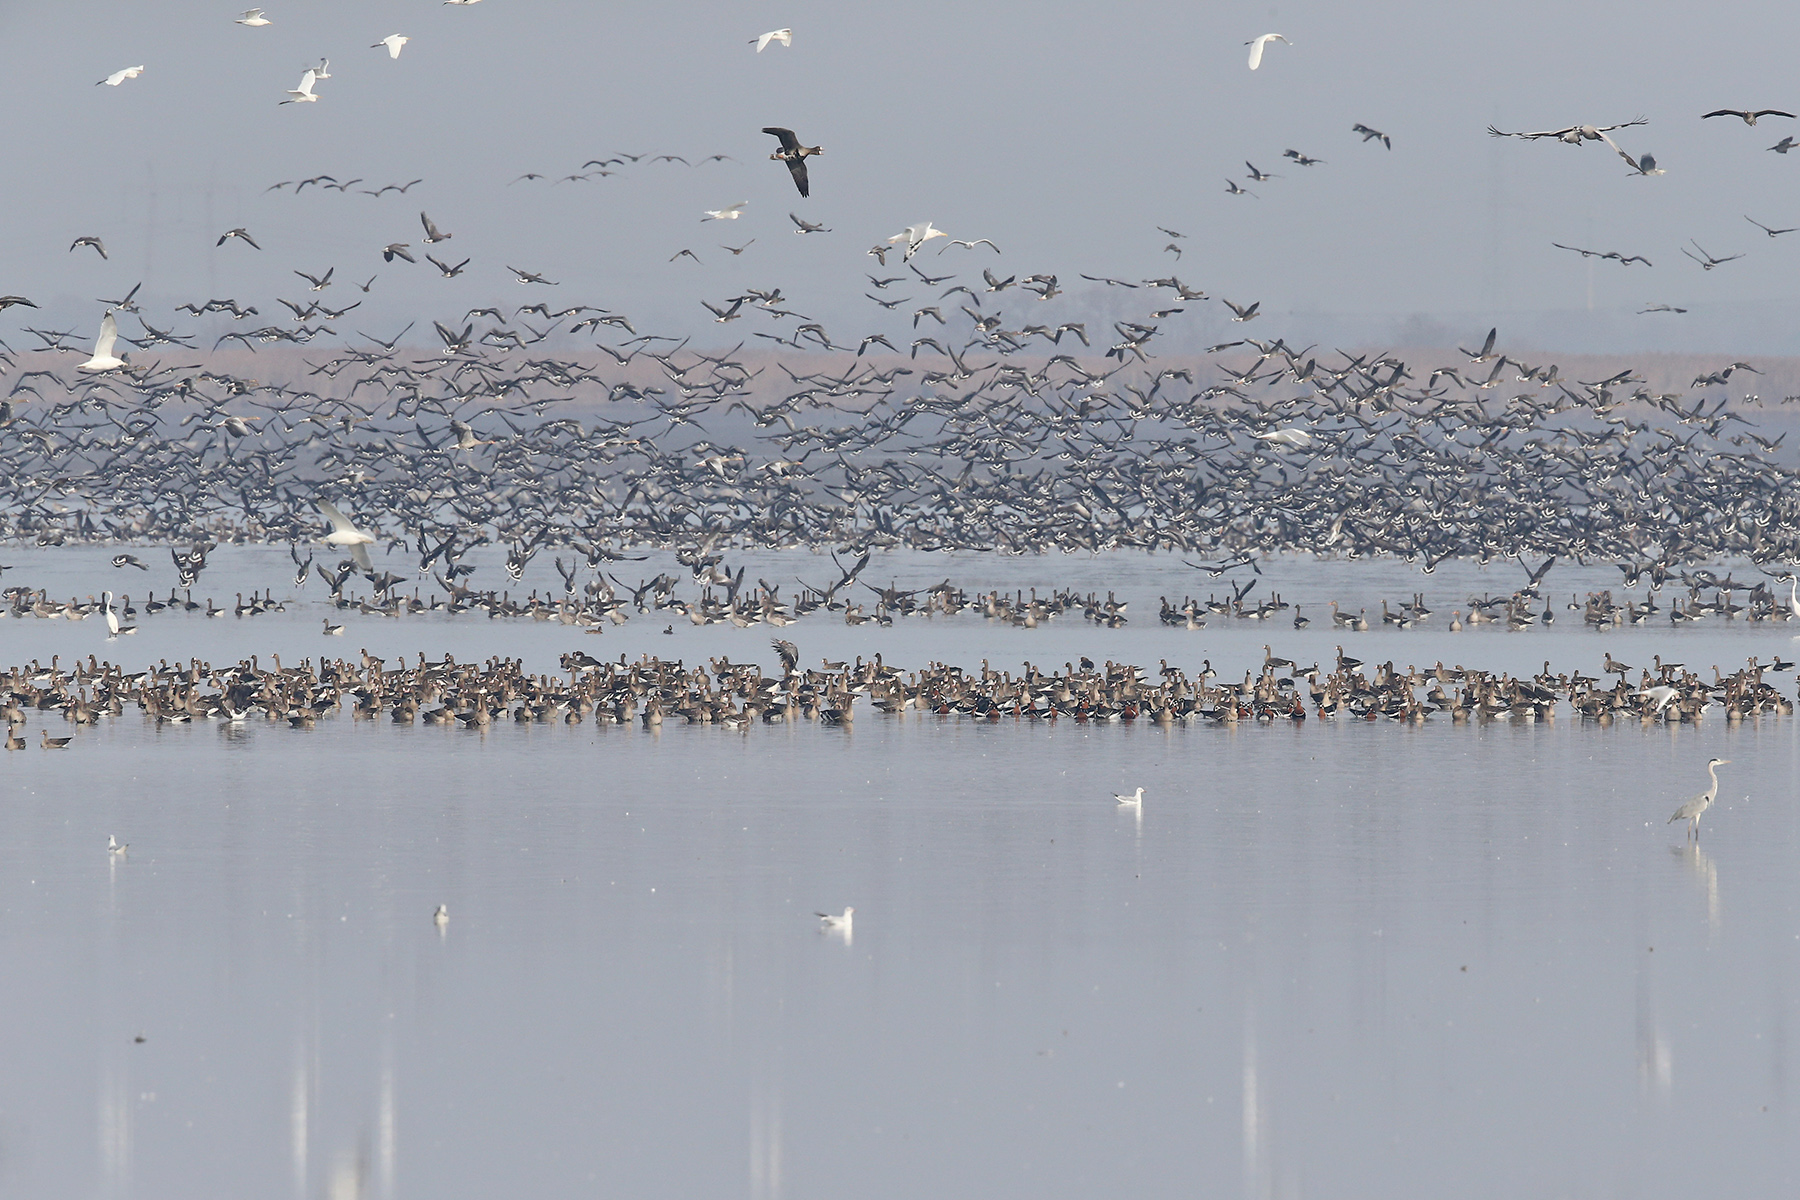 The wild geese on the Hortobágy like to roost in shallow water, for safety (image by János Oláh)